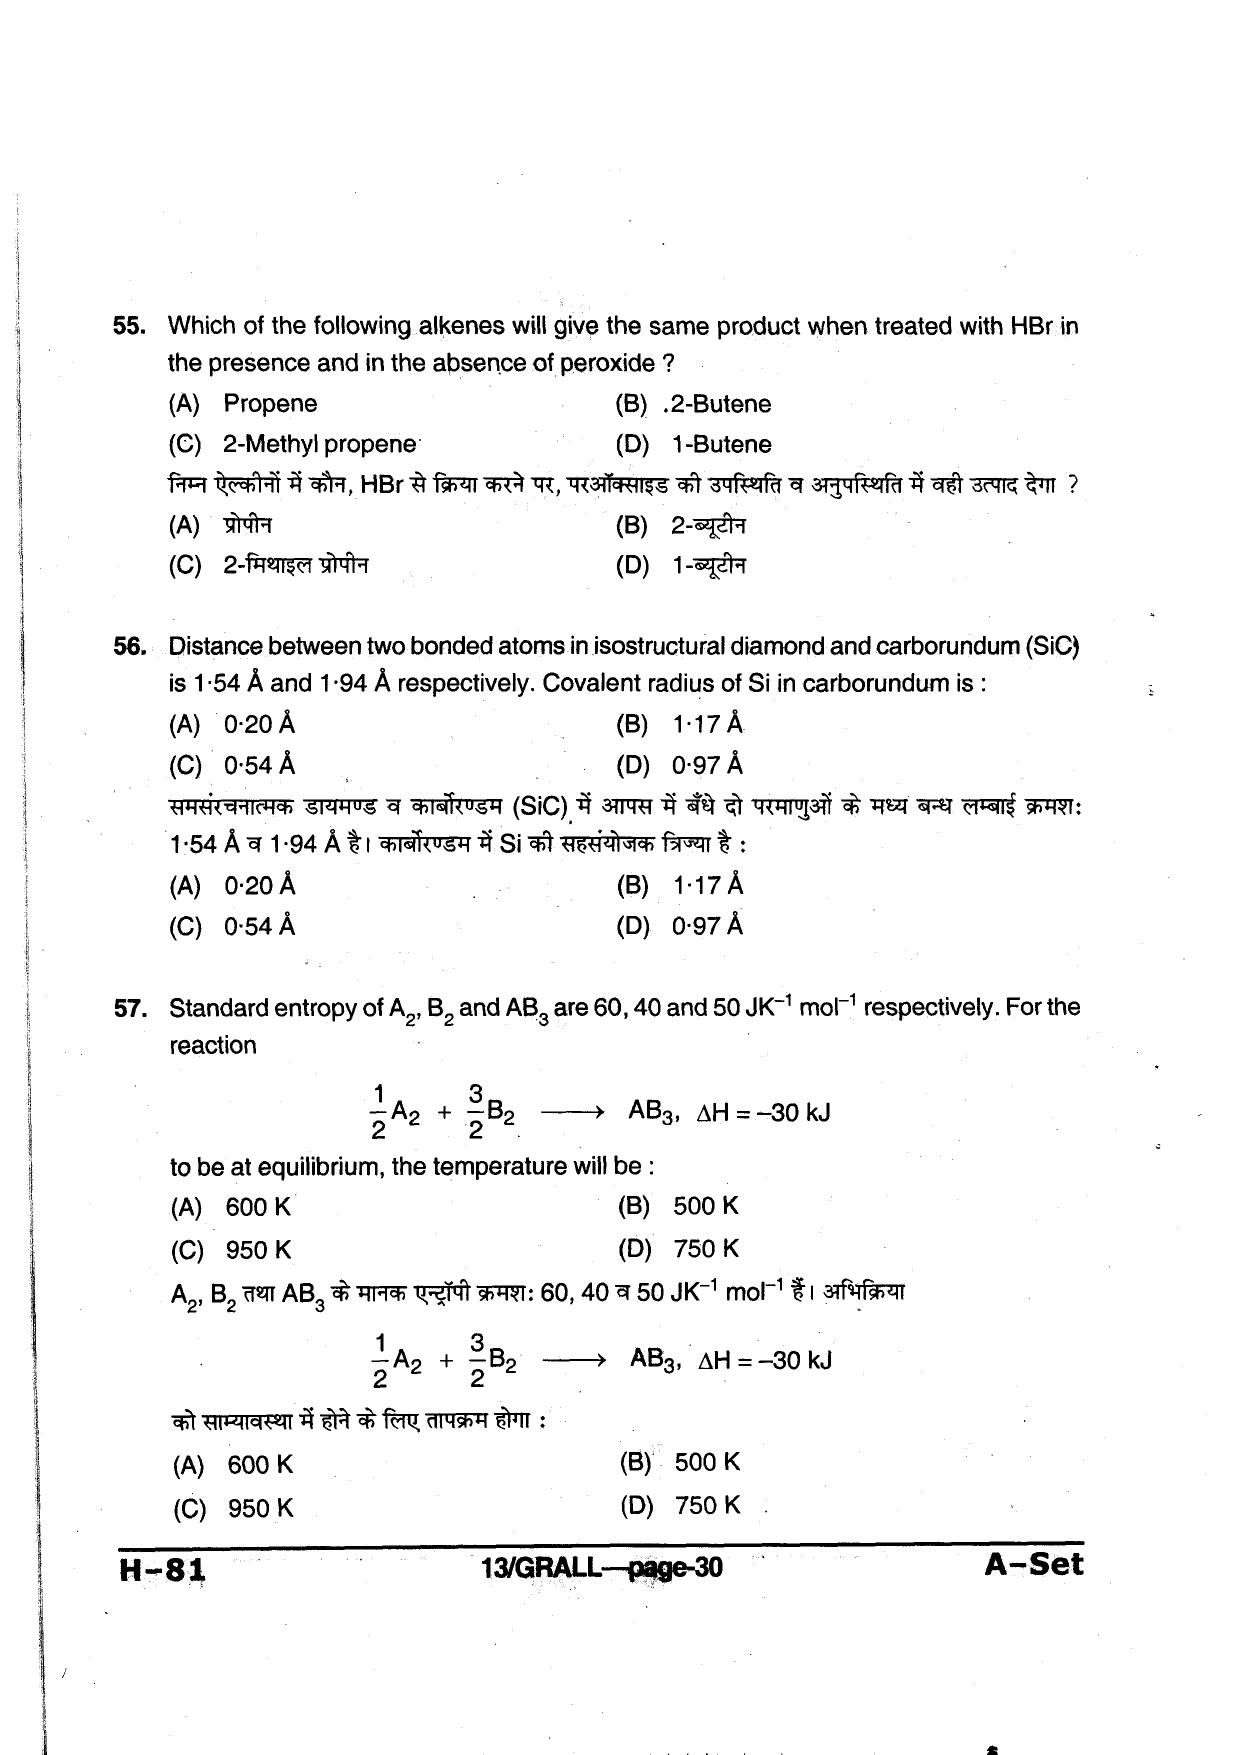 MP PAT 2013 Question Paper - Paper I - Page 30